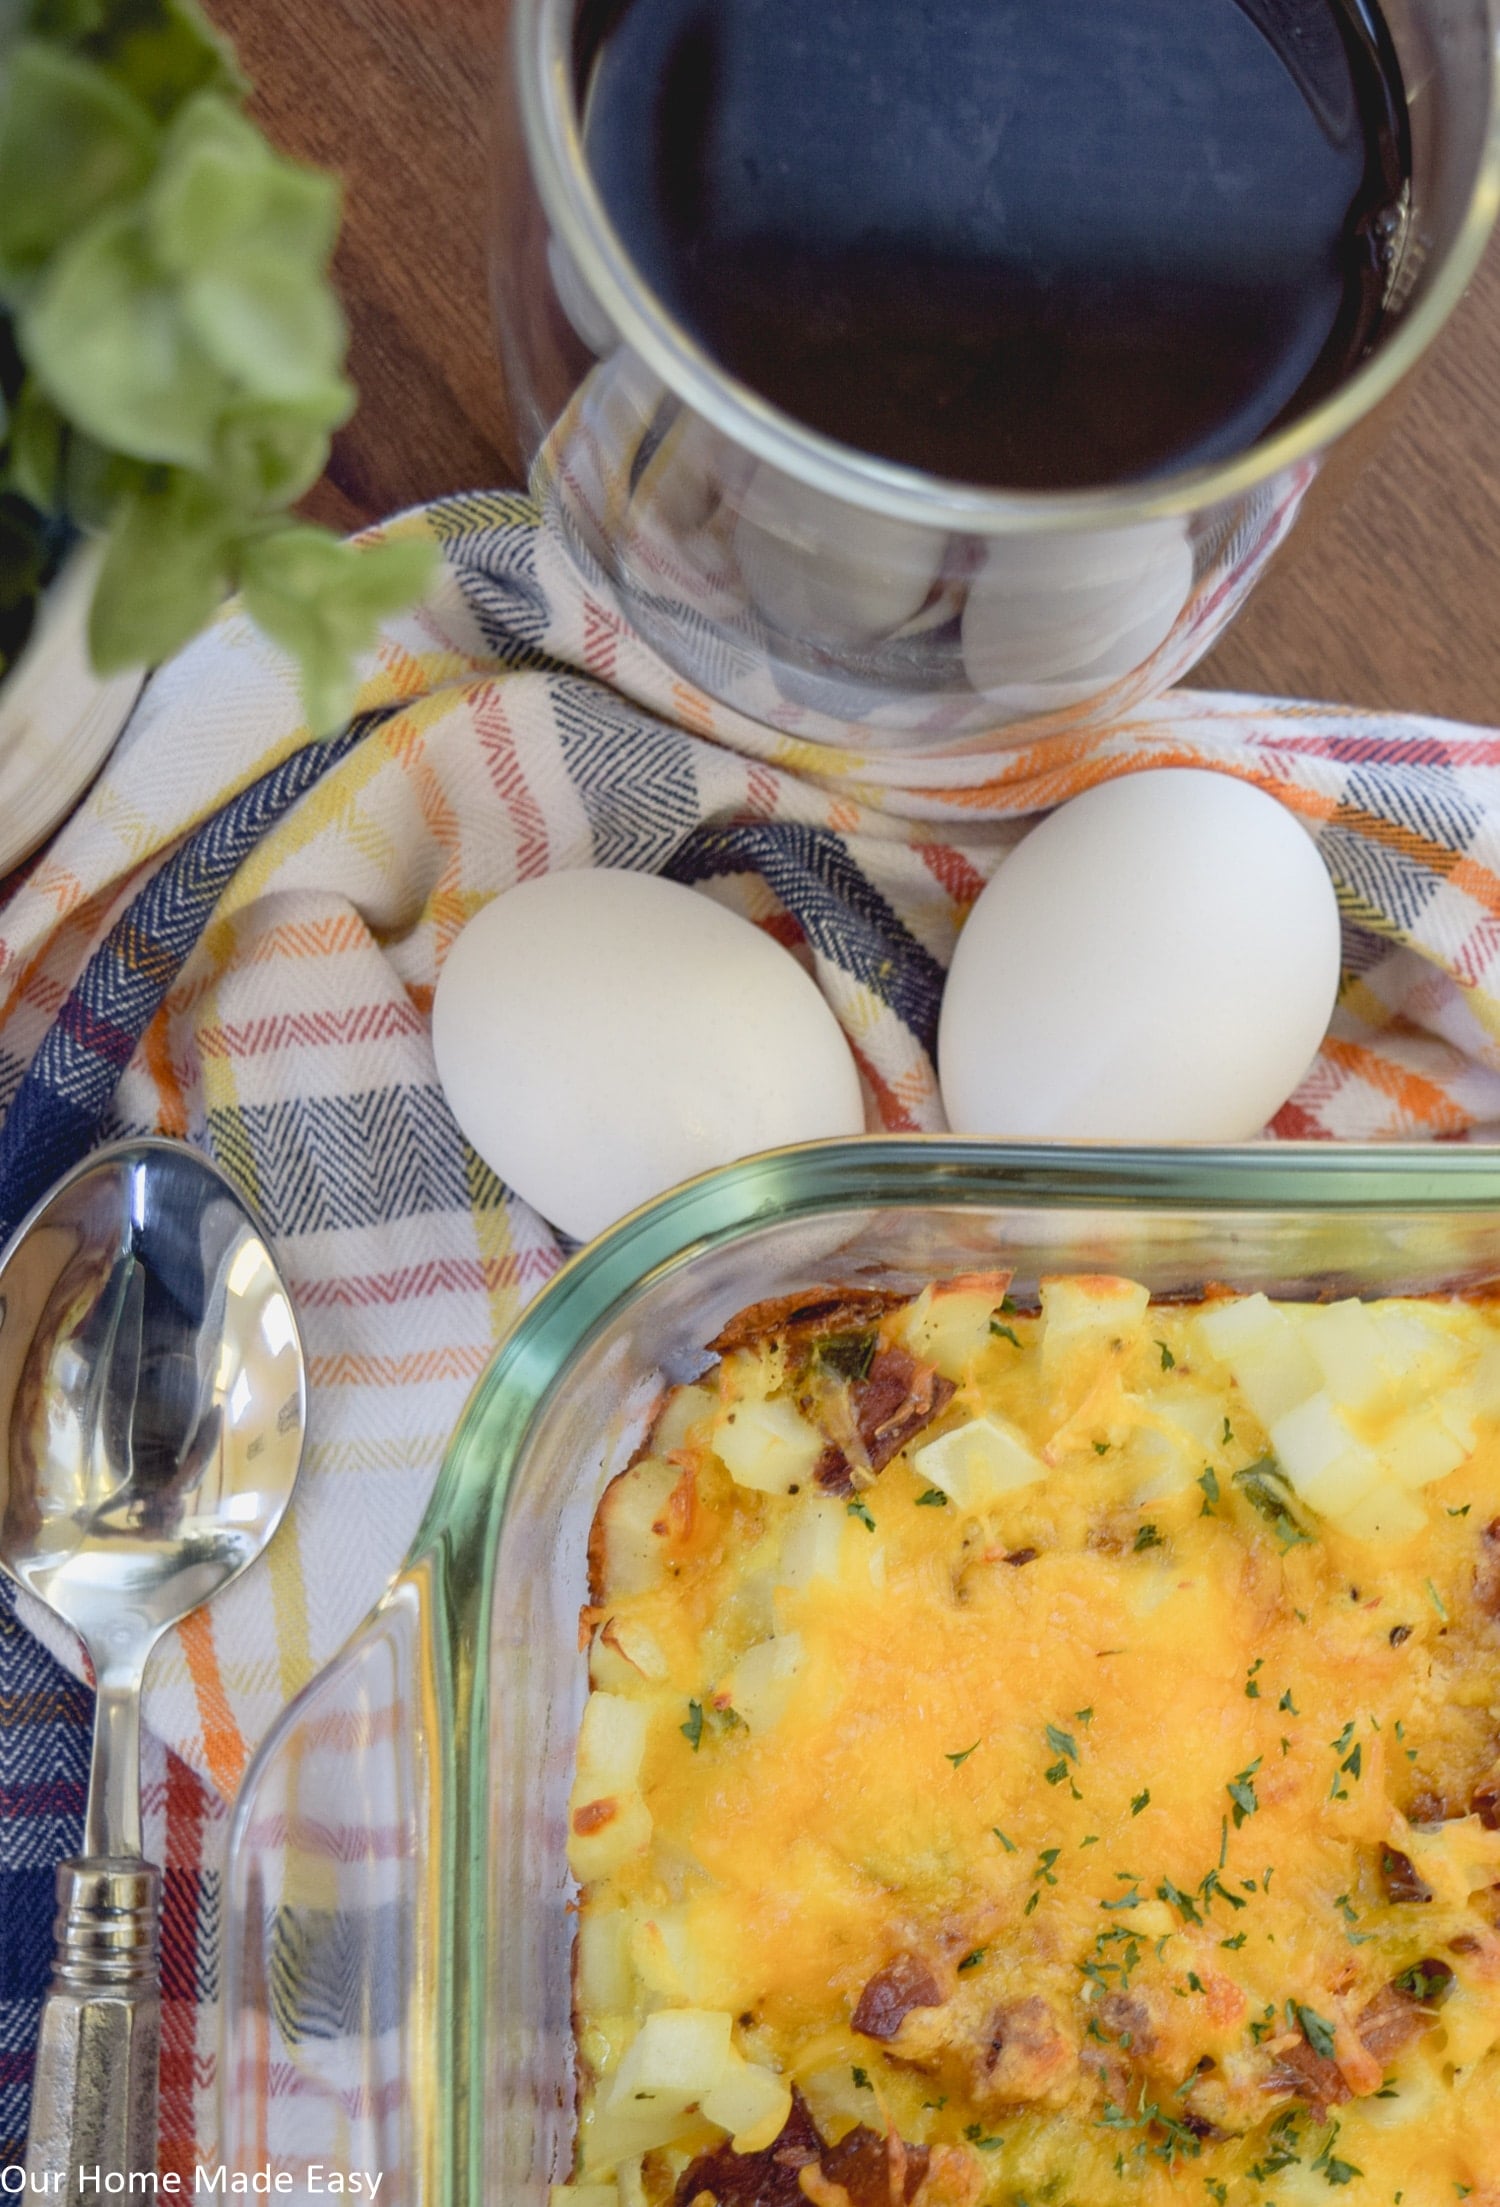 make this simple and delicious cheesy breakfast casserole for a weekend brunch